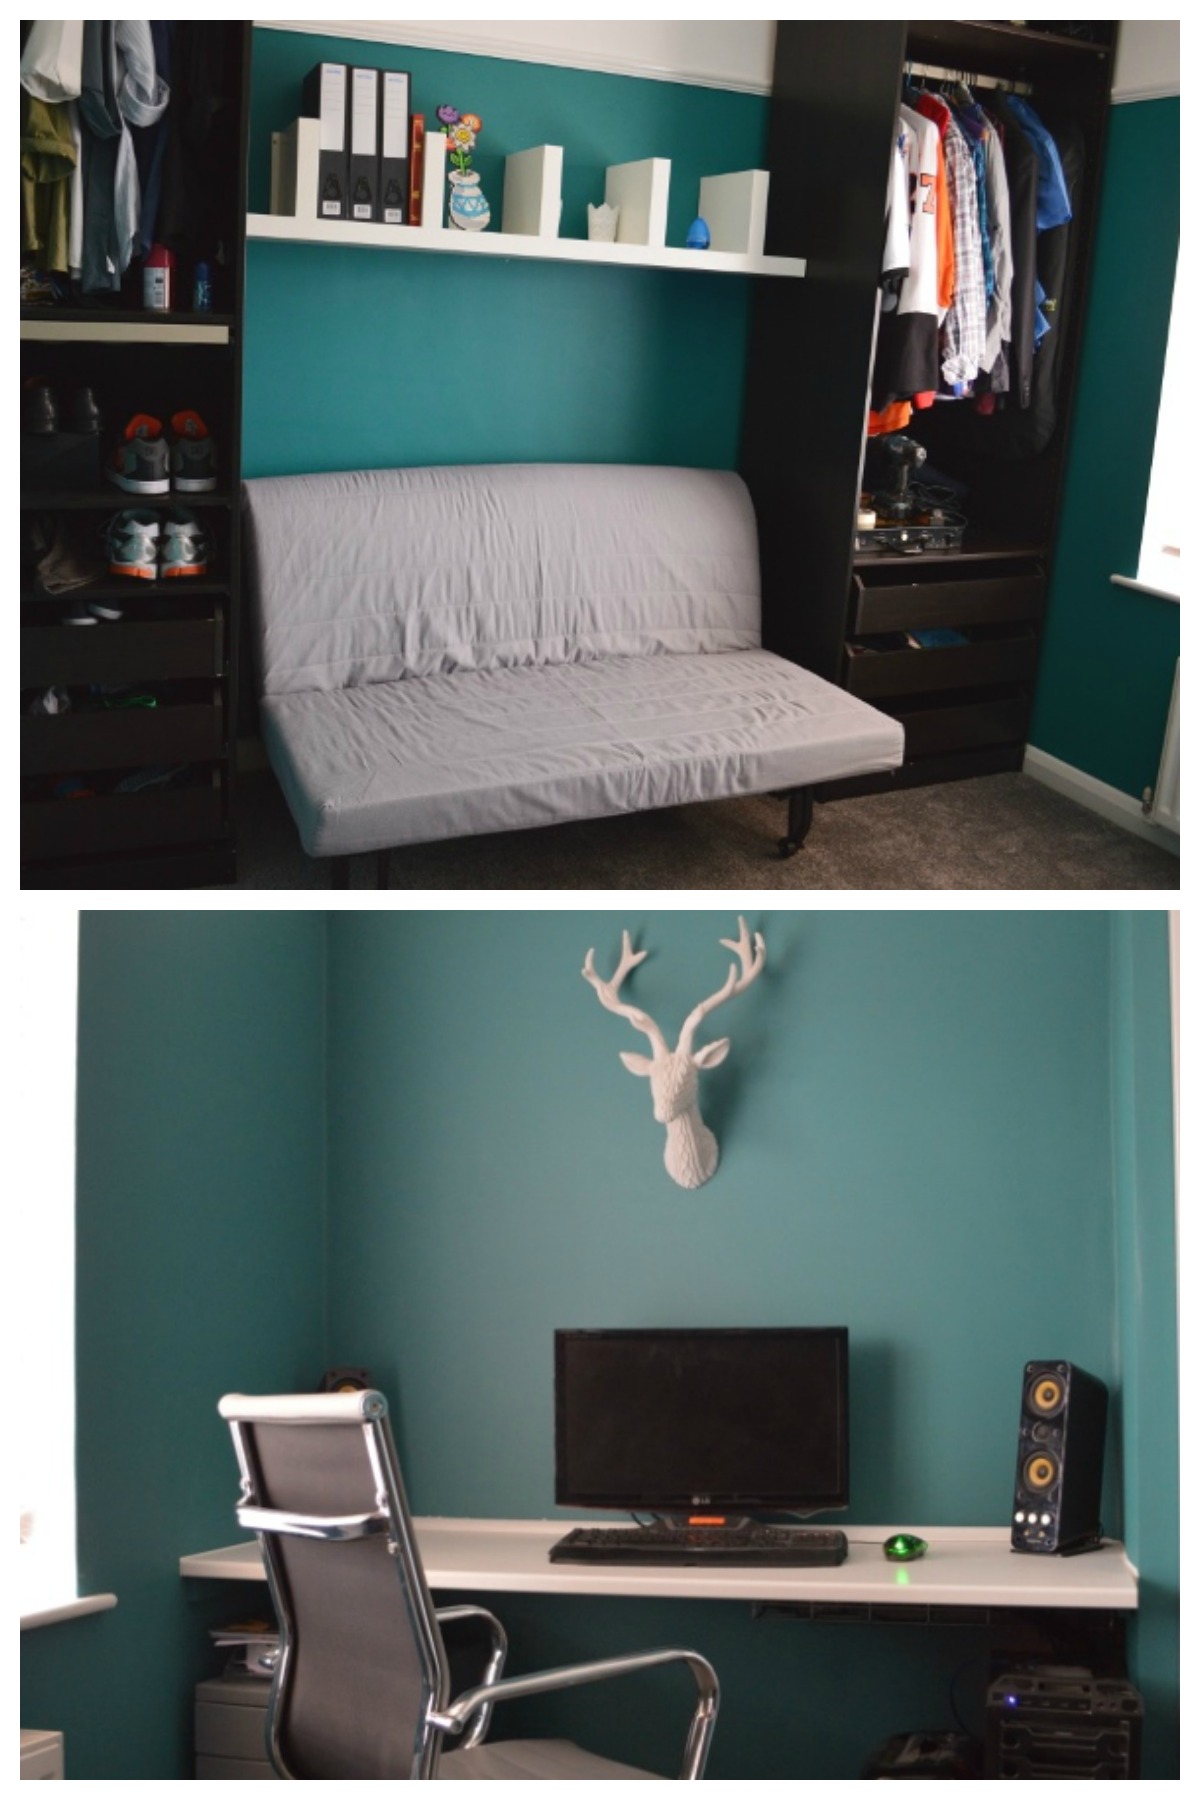 Proud Peacock bedroom and office